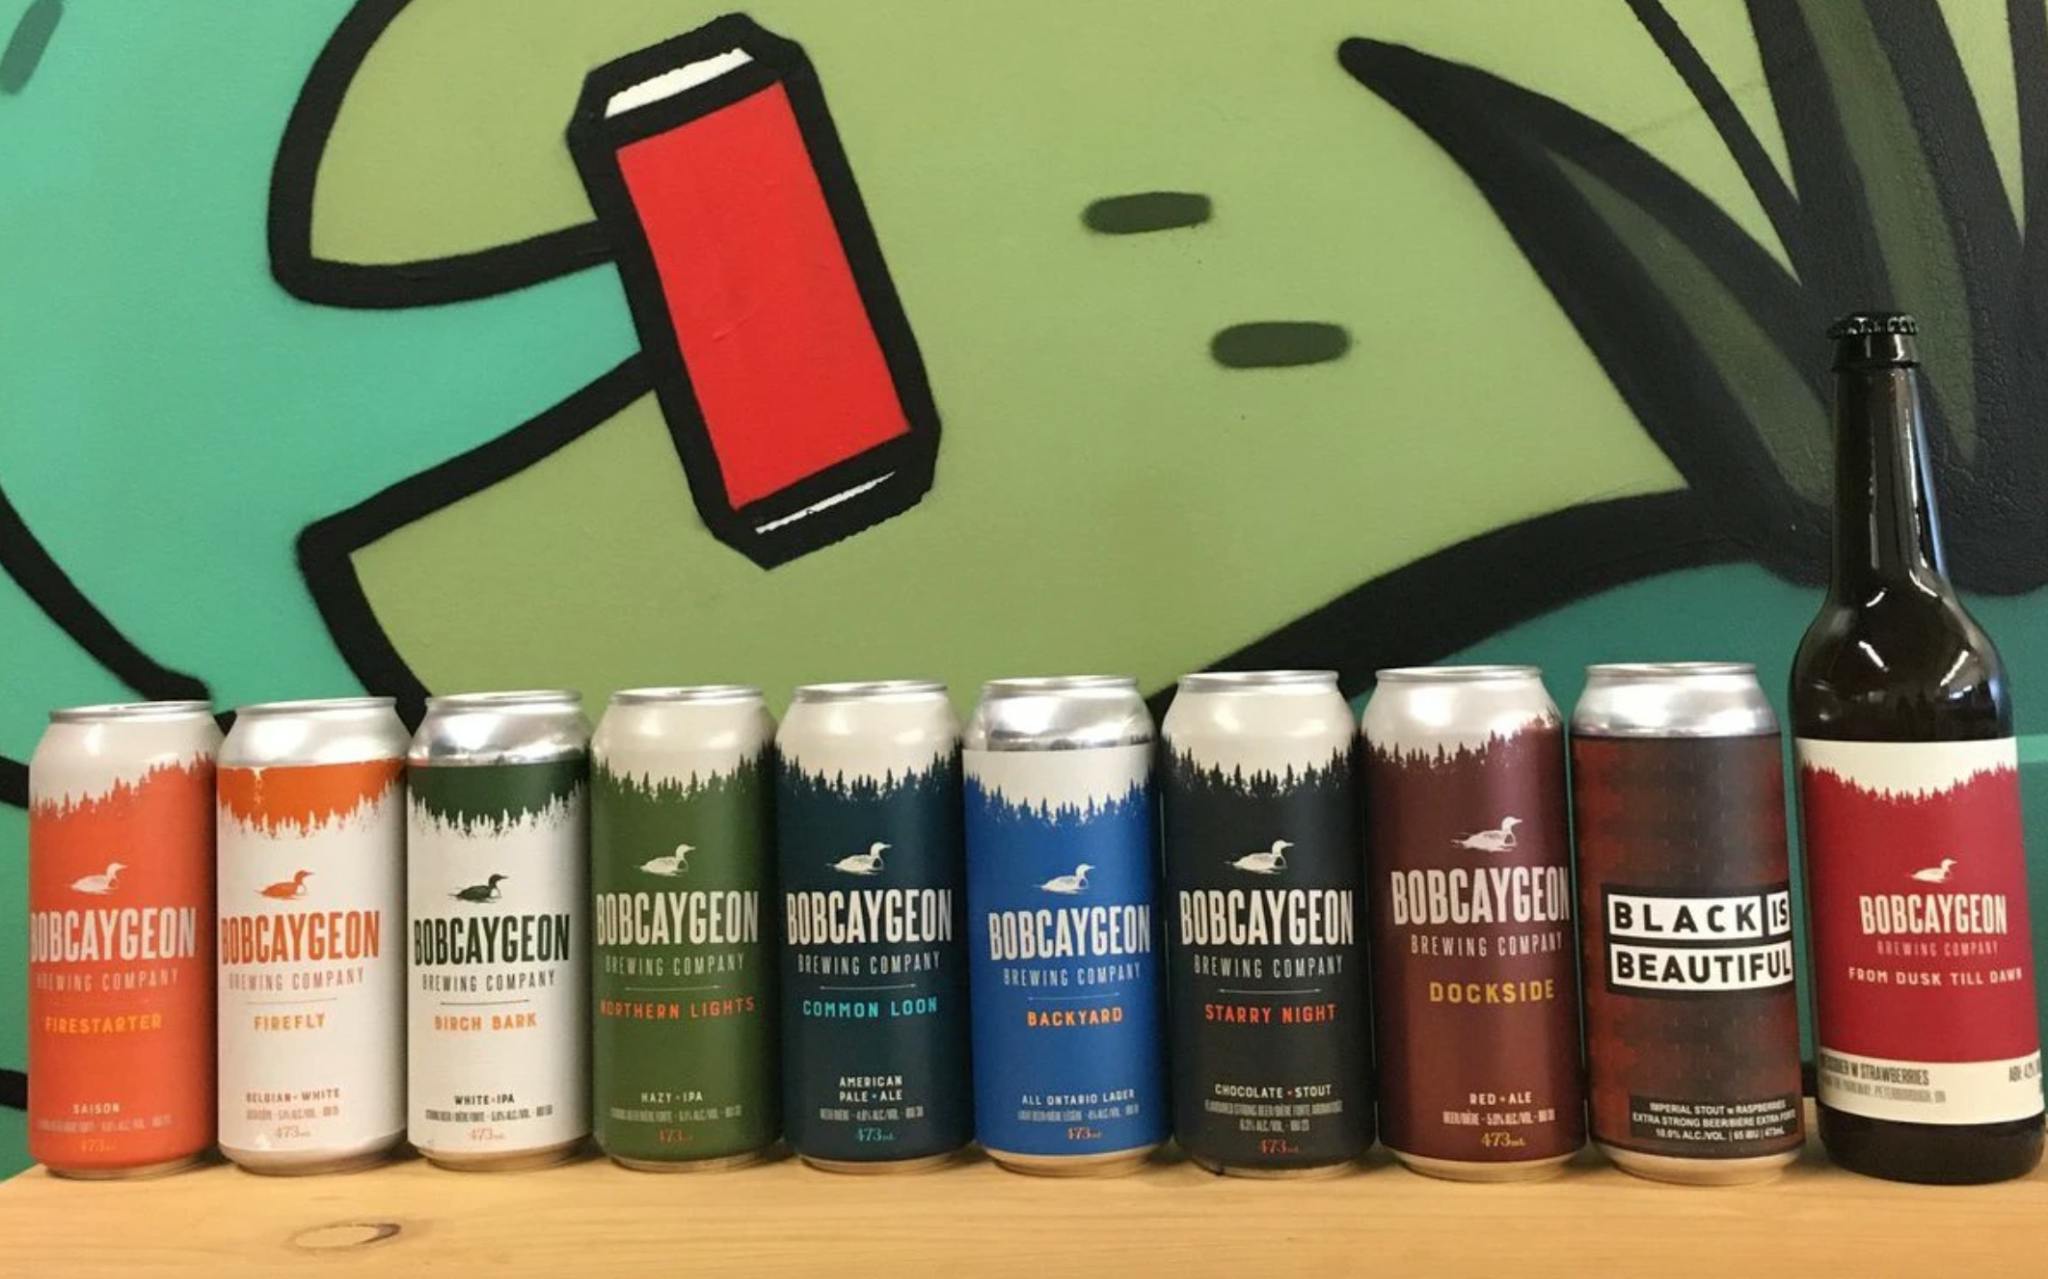 Bobcaygeon Brewing products